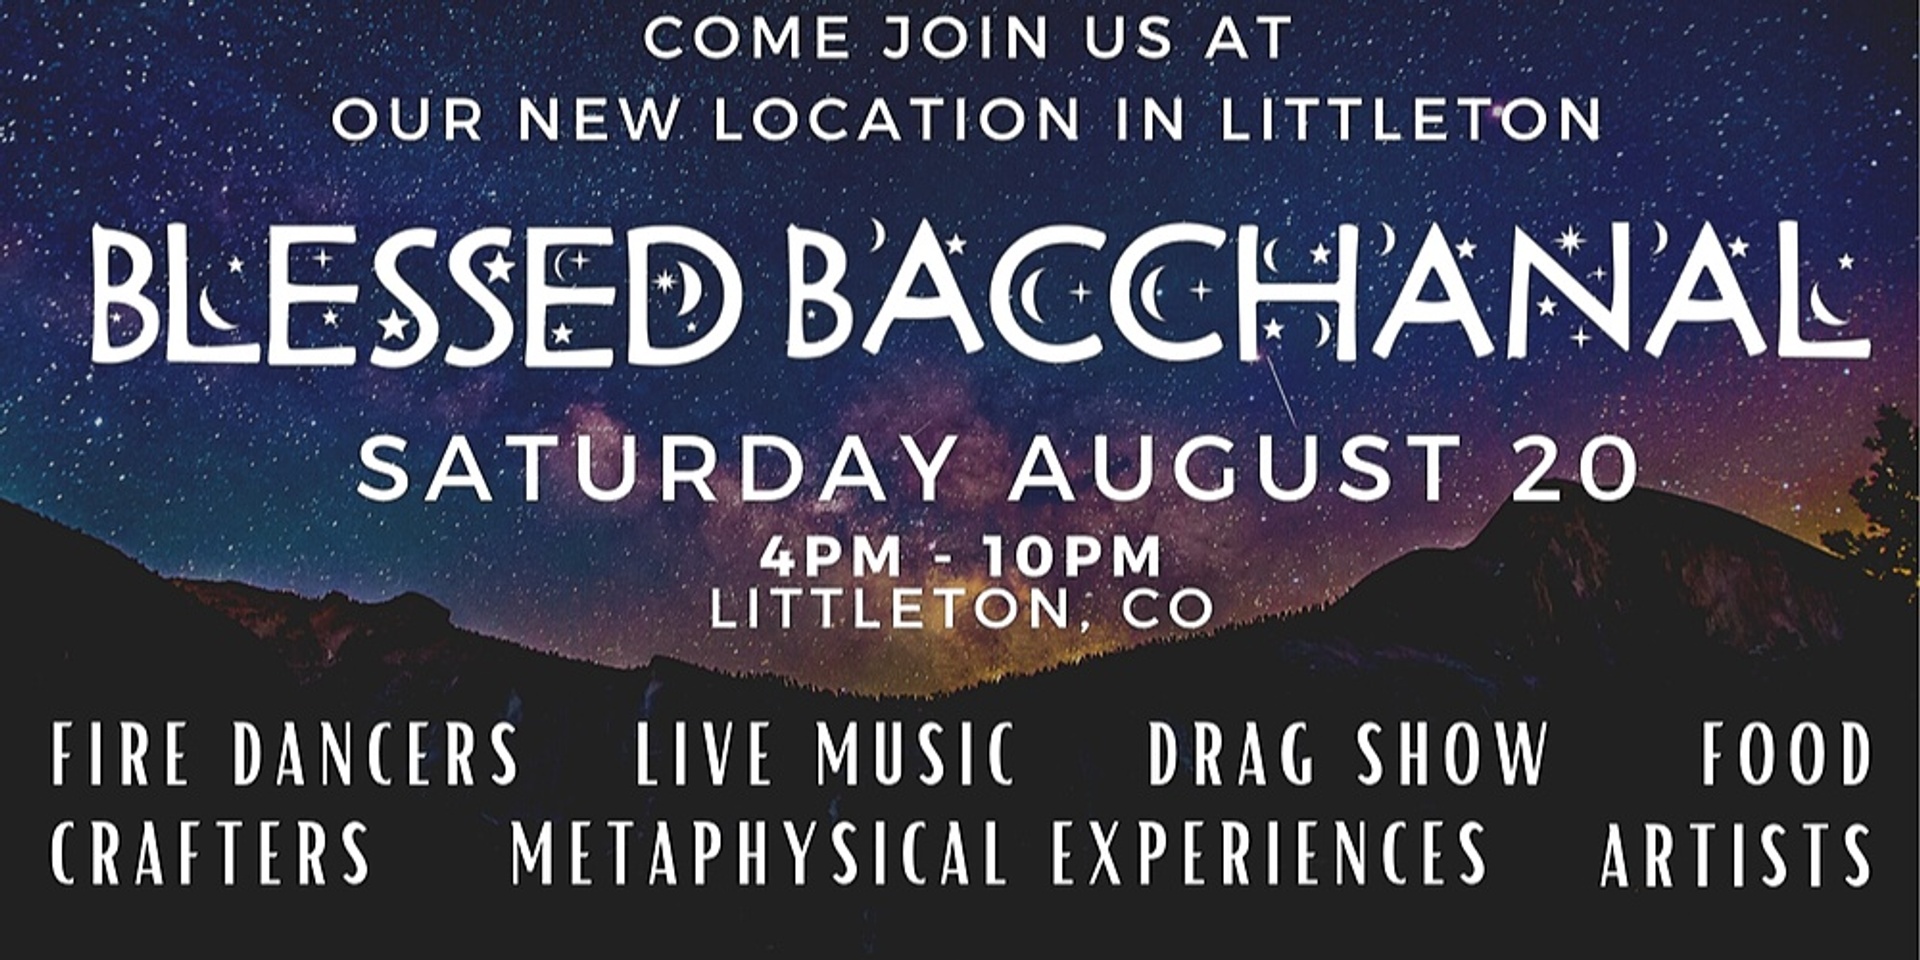 Blessed Bacchanal August 20